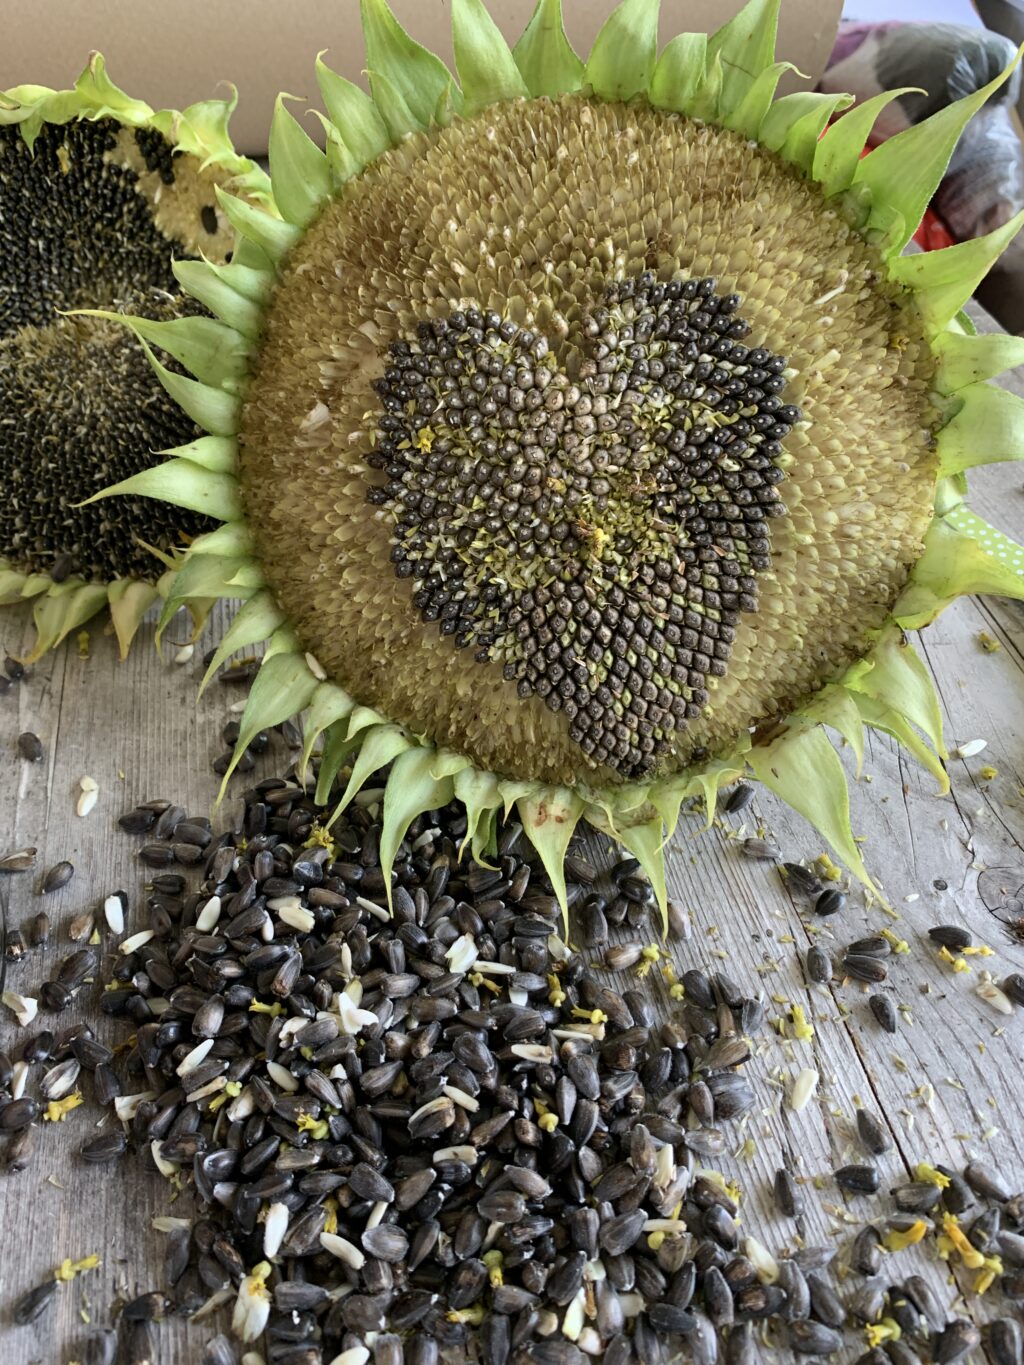 Seeds carefully harvested from a sunflower to leave a heart shape of untouched seeds in its centre